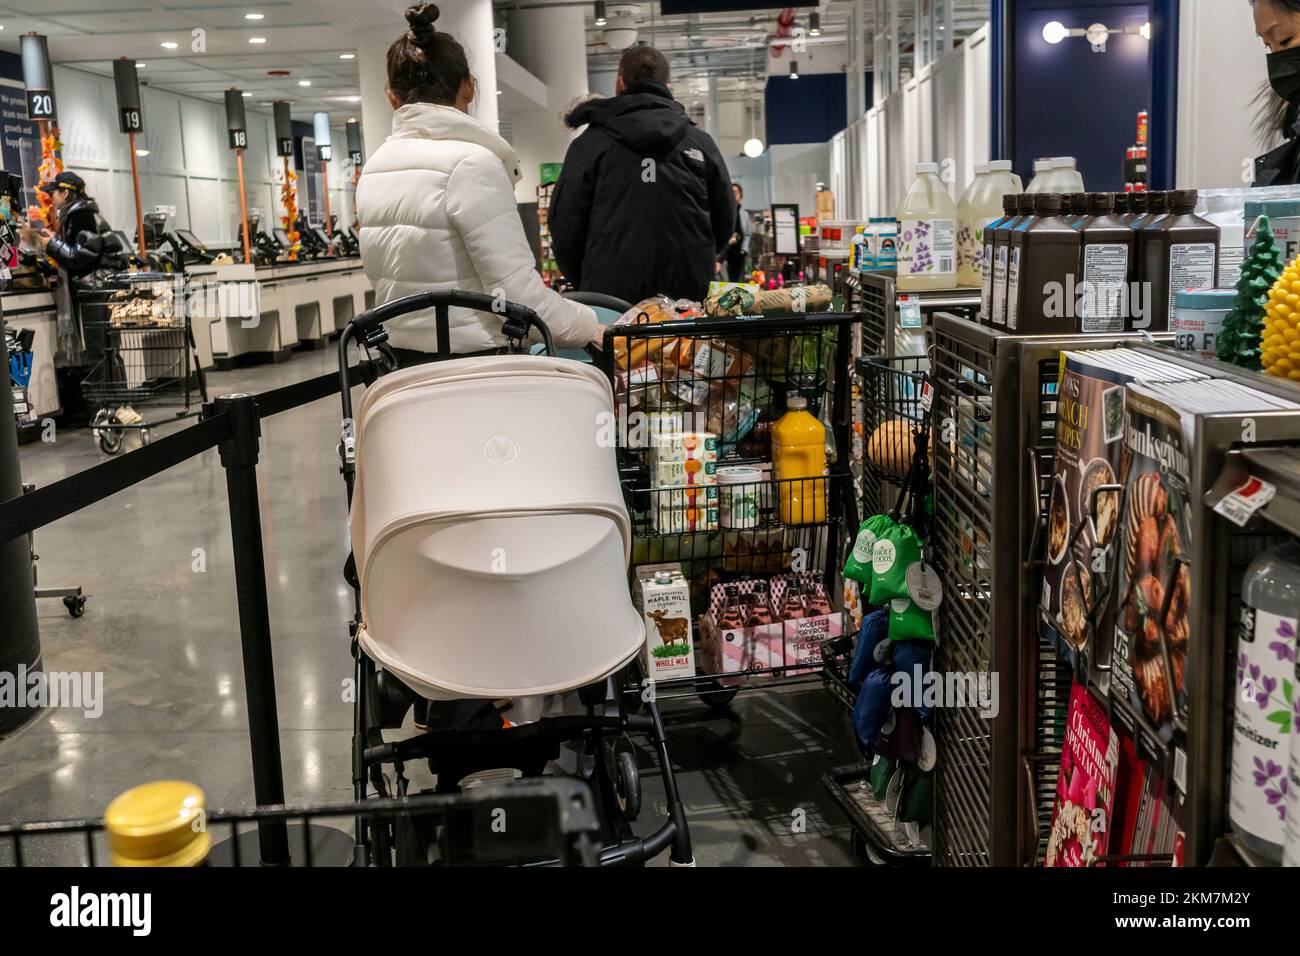 Shopping in a Whole Foods supermarket in New York on Thursday, November 17, 2022. The U.S. Federal Reserve Bank reported that it will be difficult to bring inflation down without a recession. (© Richard B. Levine) Stock Photo